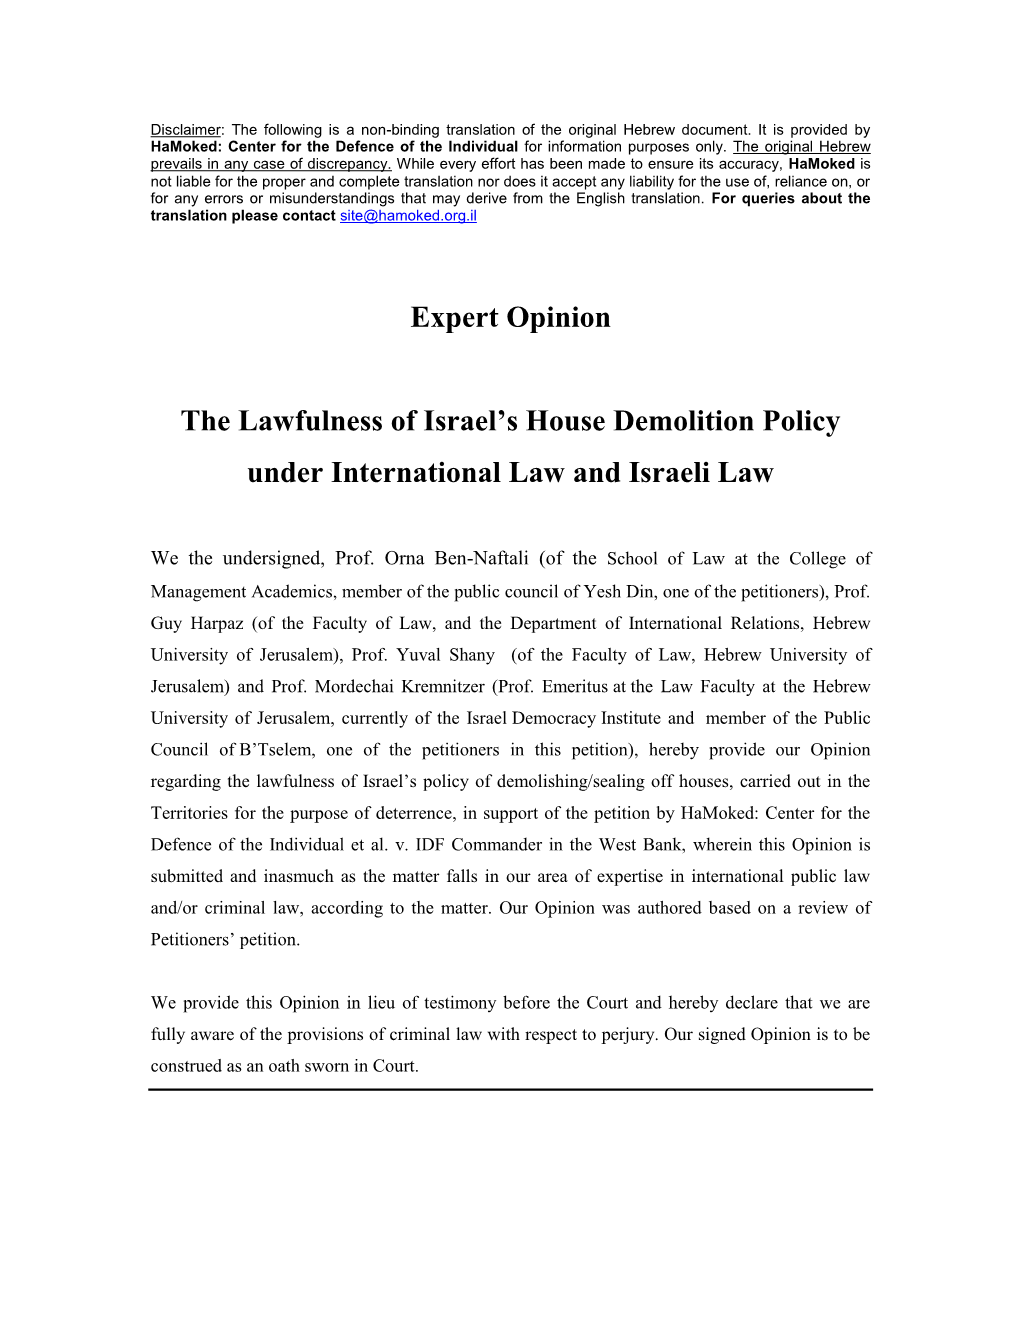 Expert Opinion the Lawfulness of Israel's House Demolition Policy